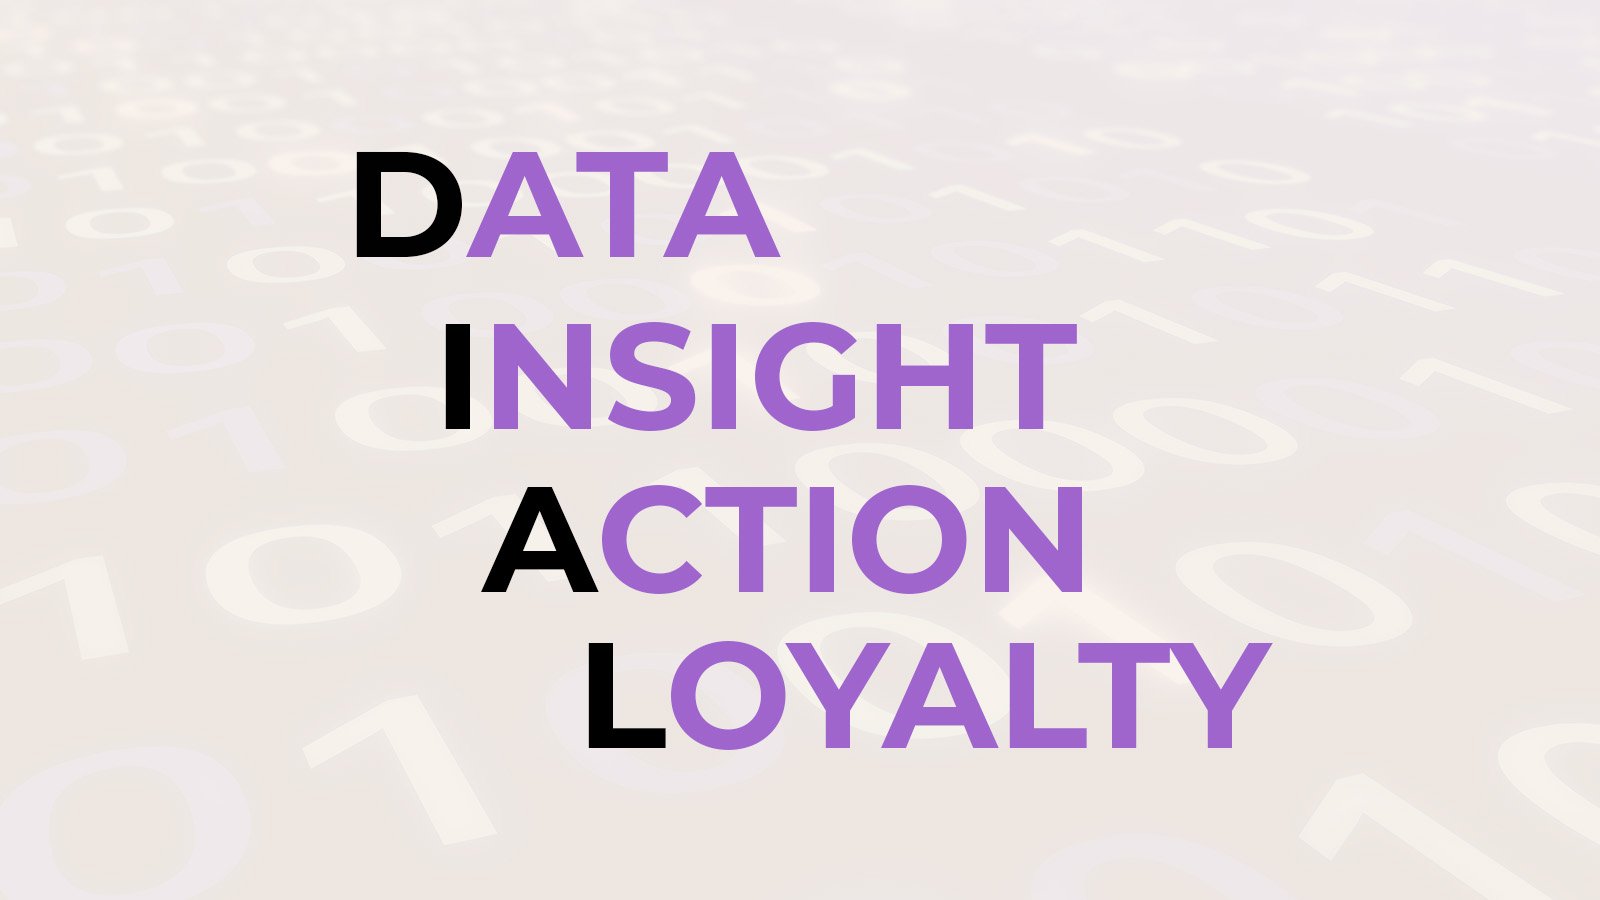 DIAL - Data Insight Action Loyalty